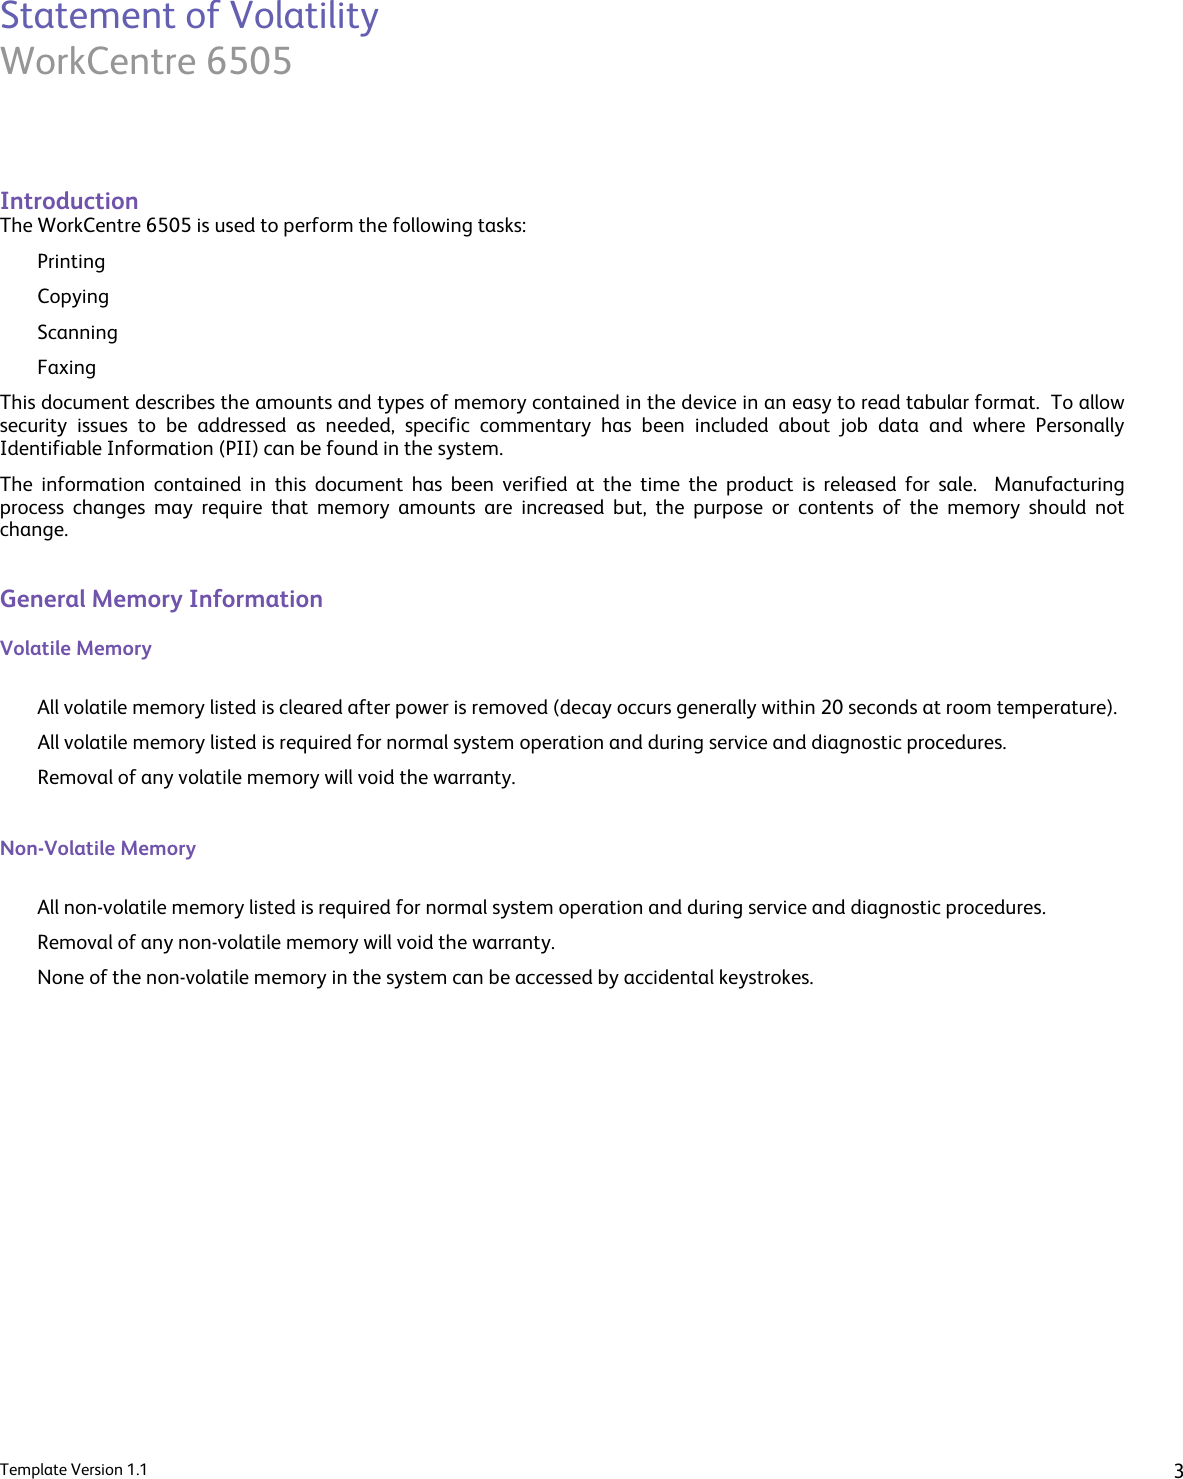 Page 3 of 6 - Xerox Xerox-Workcentre-6505-Users-Manual WorkCentre_6505_Statement_Of_Volatility